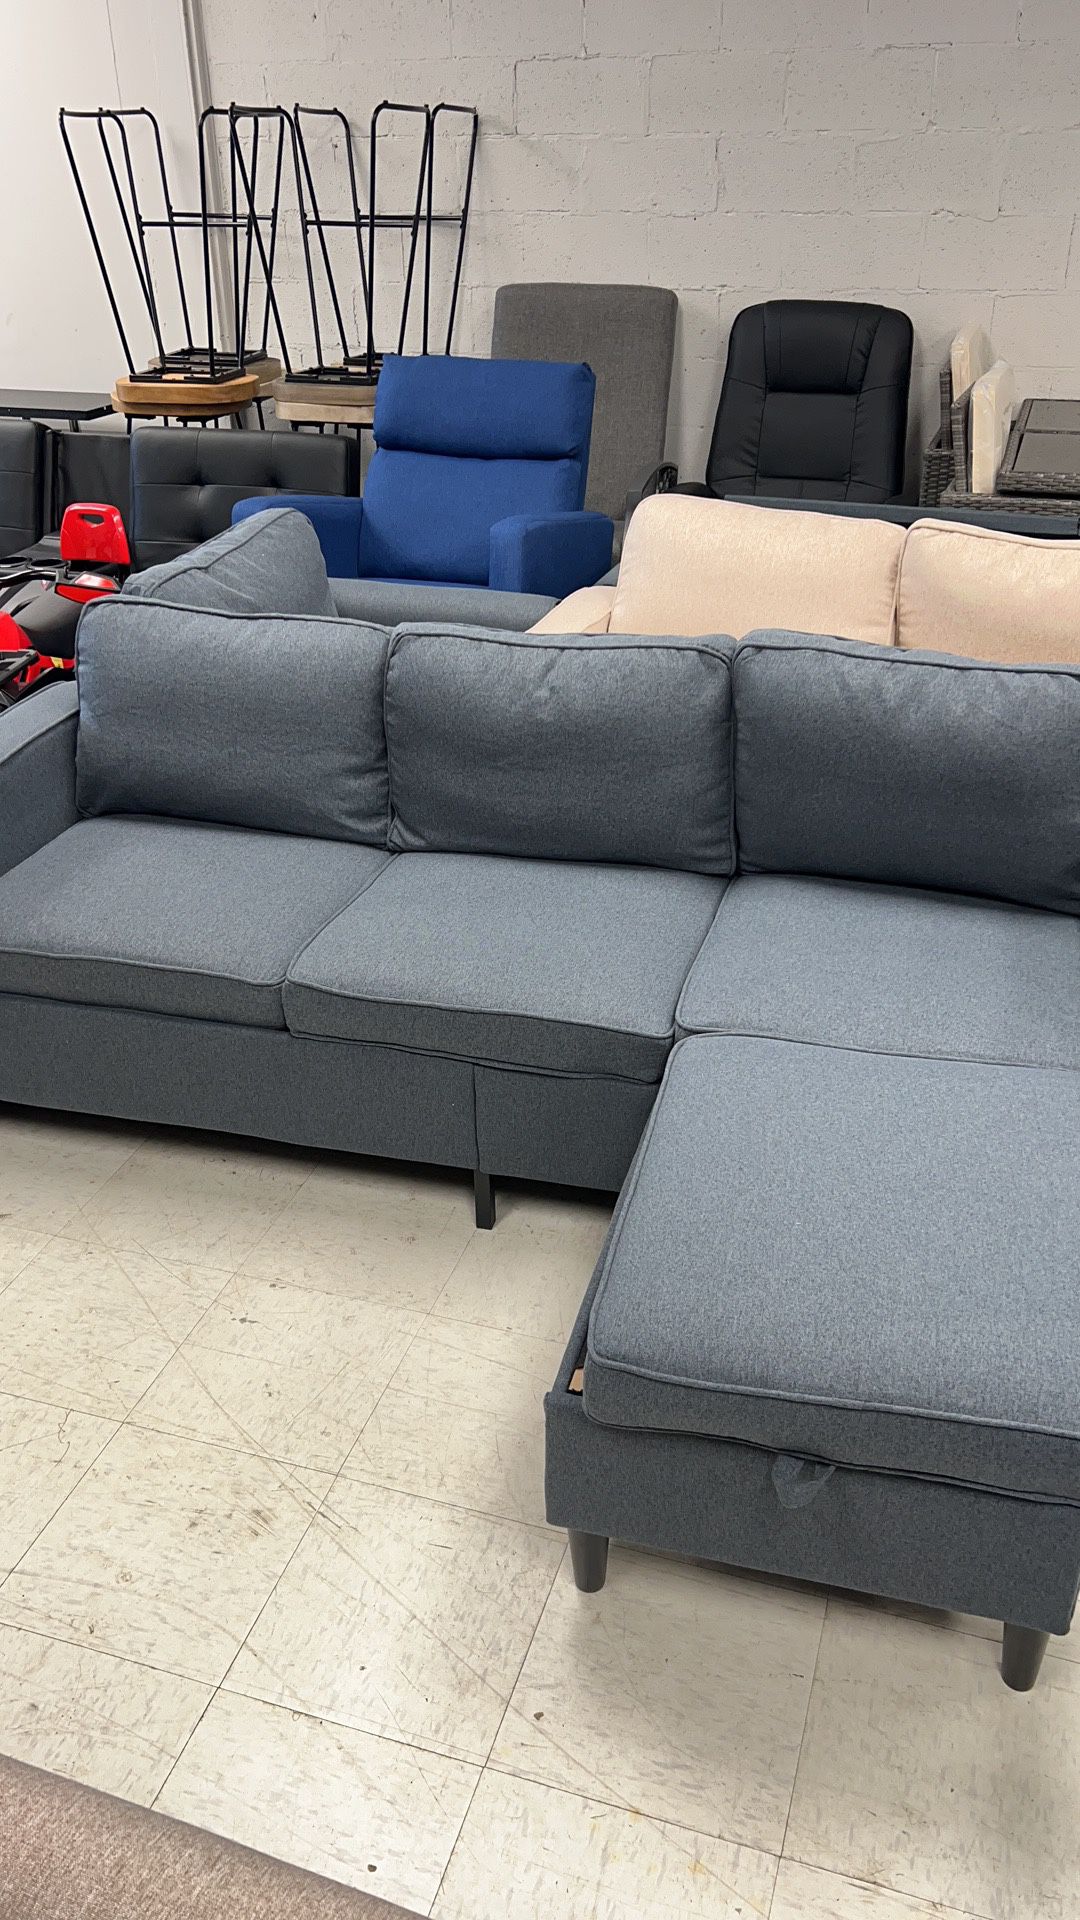 Sectional Sofa Couch, 3 Seat Sofa with Flexible Storage Ottoman, Modern L-Shape Linen Couches